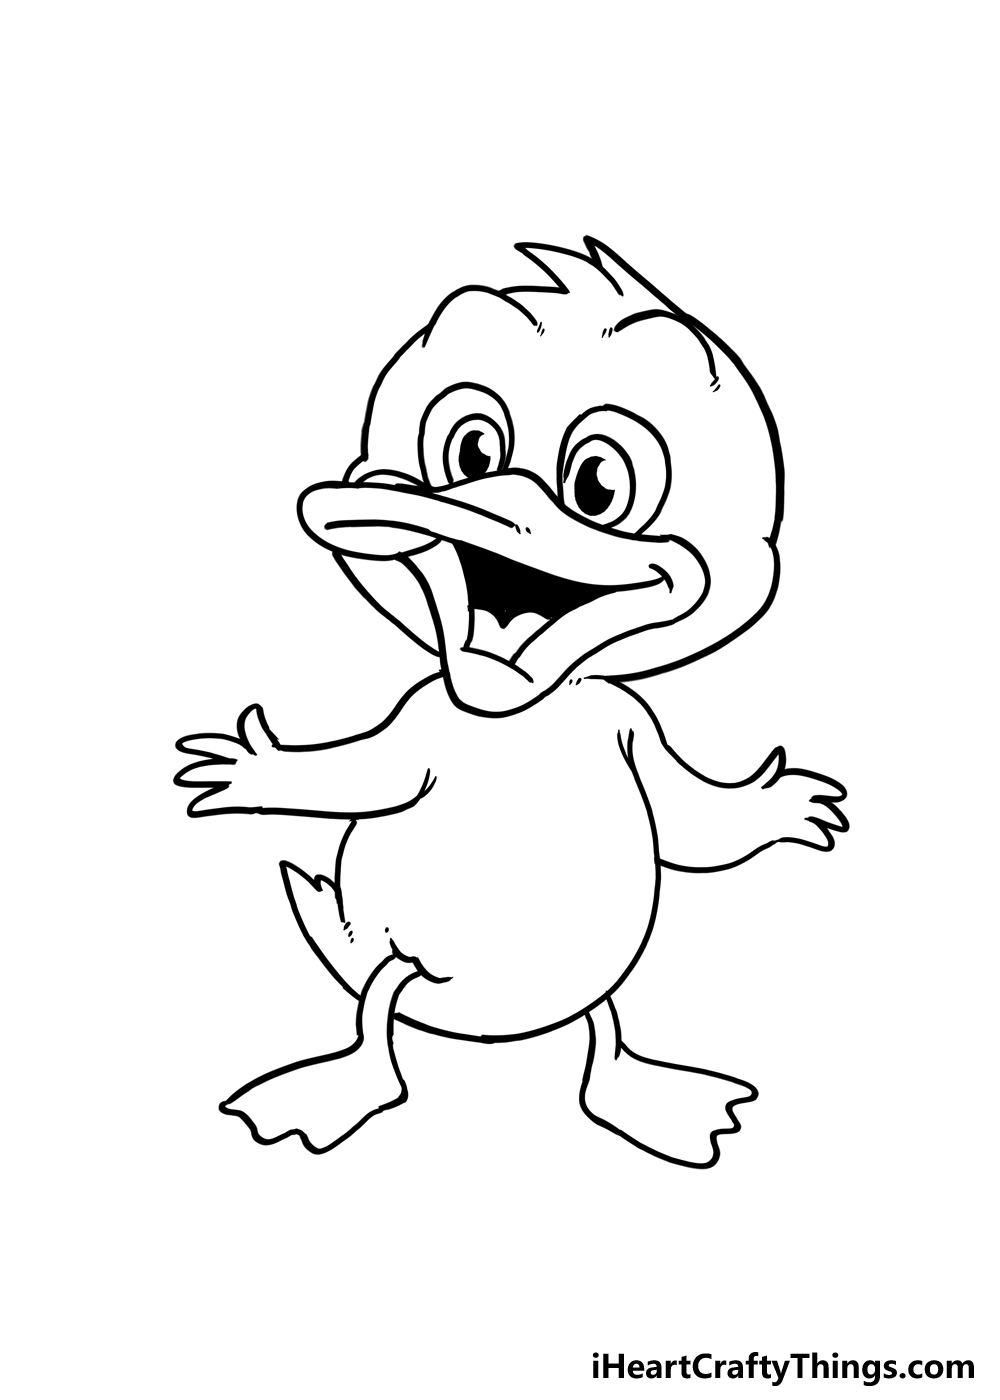 How to Draw A Cartoon Duck step 5